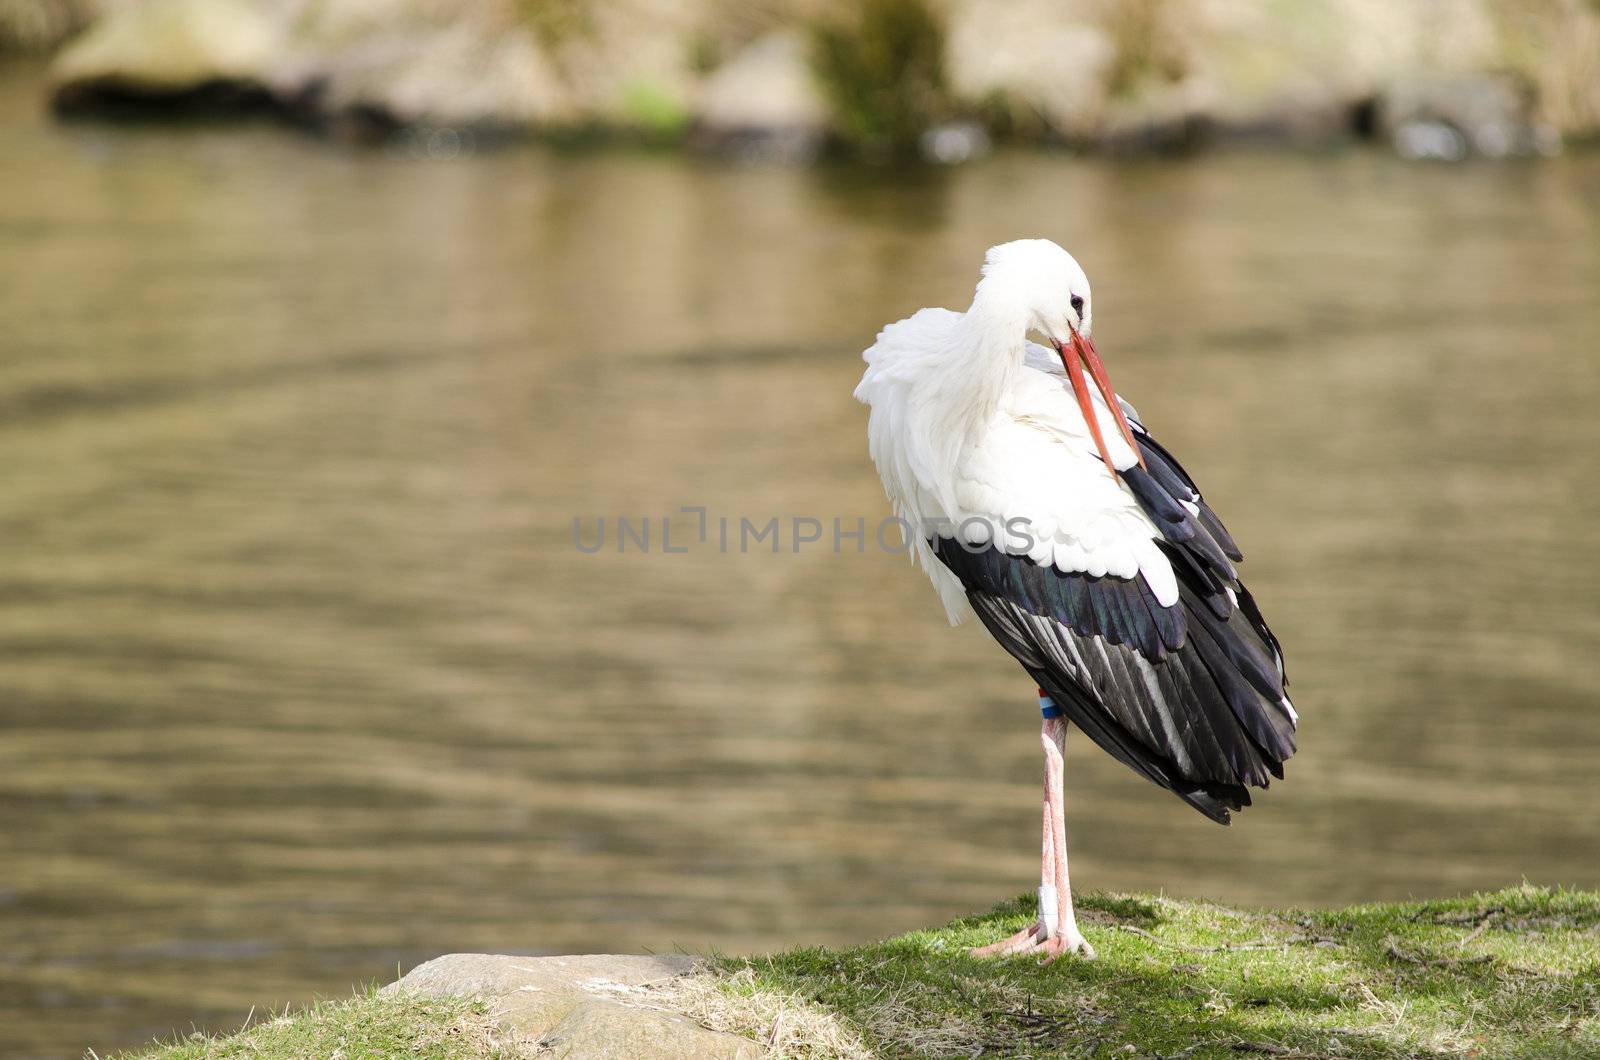 White stork at a lake (Ciconia ciconia) by Arrxxx